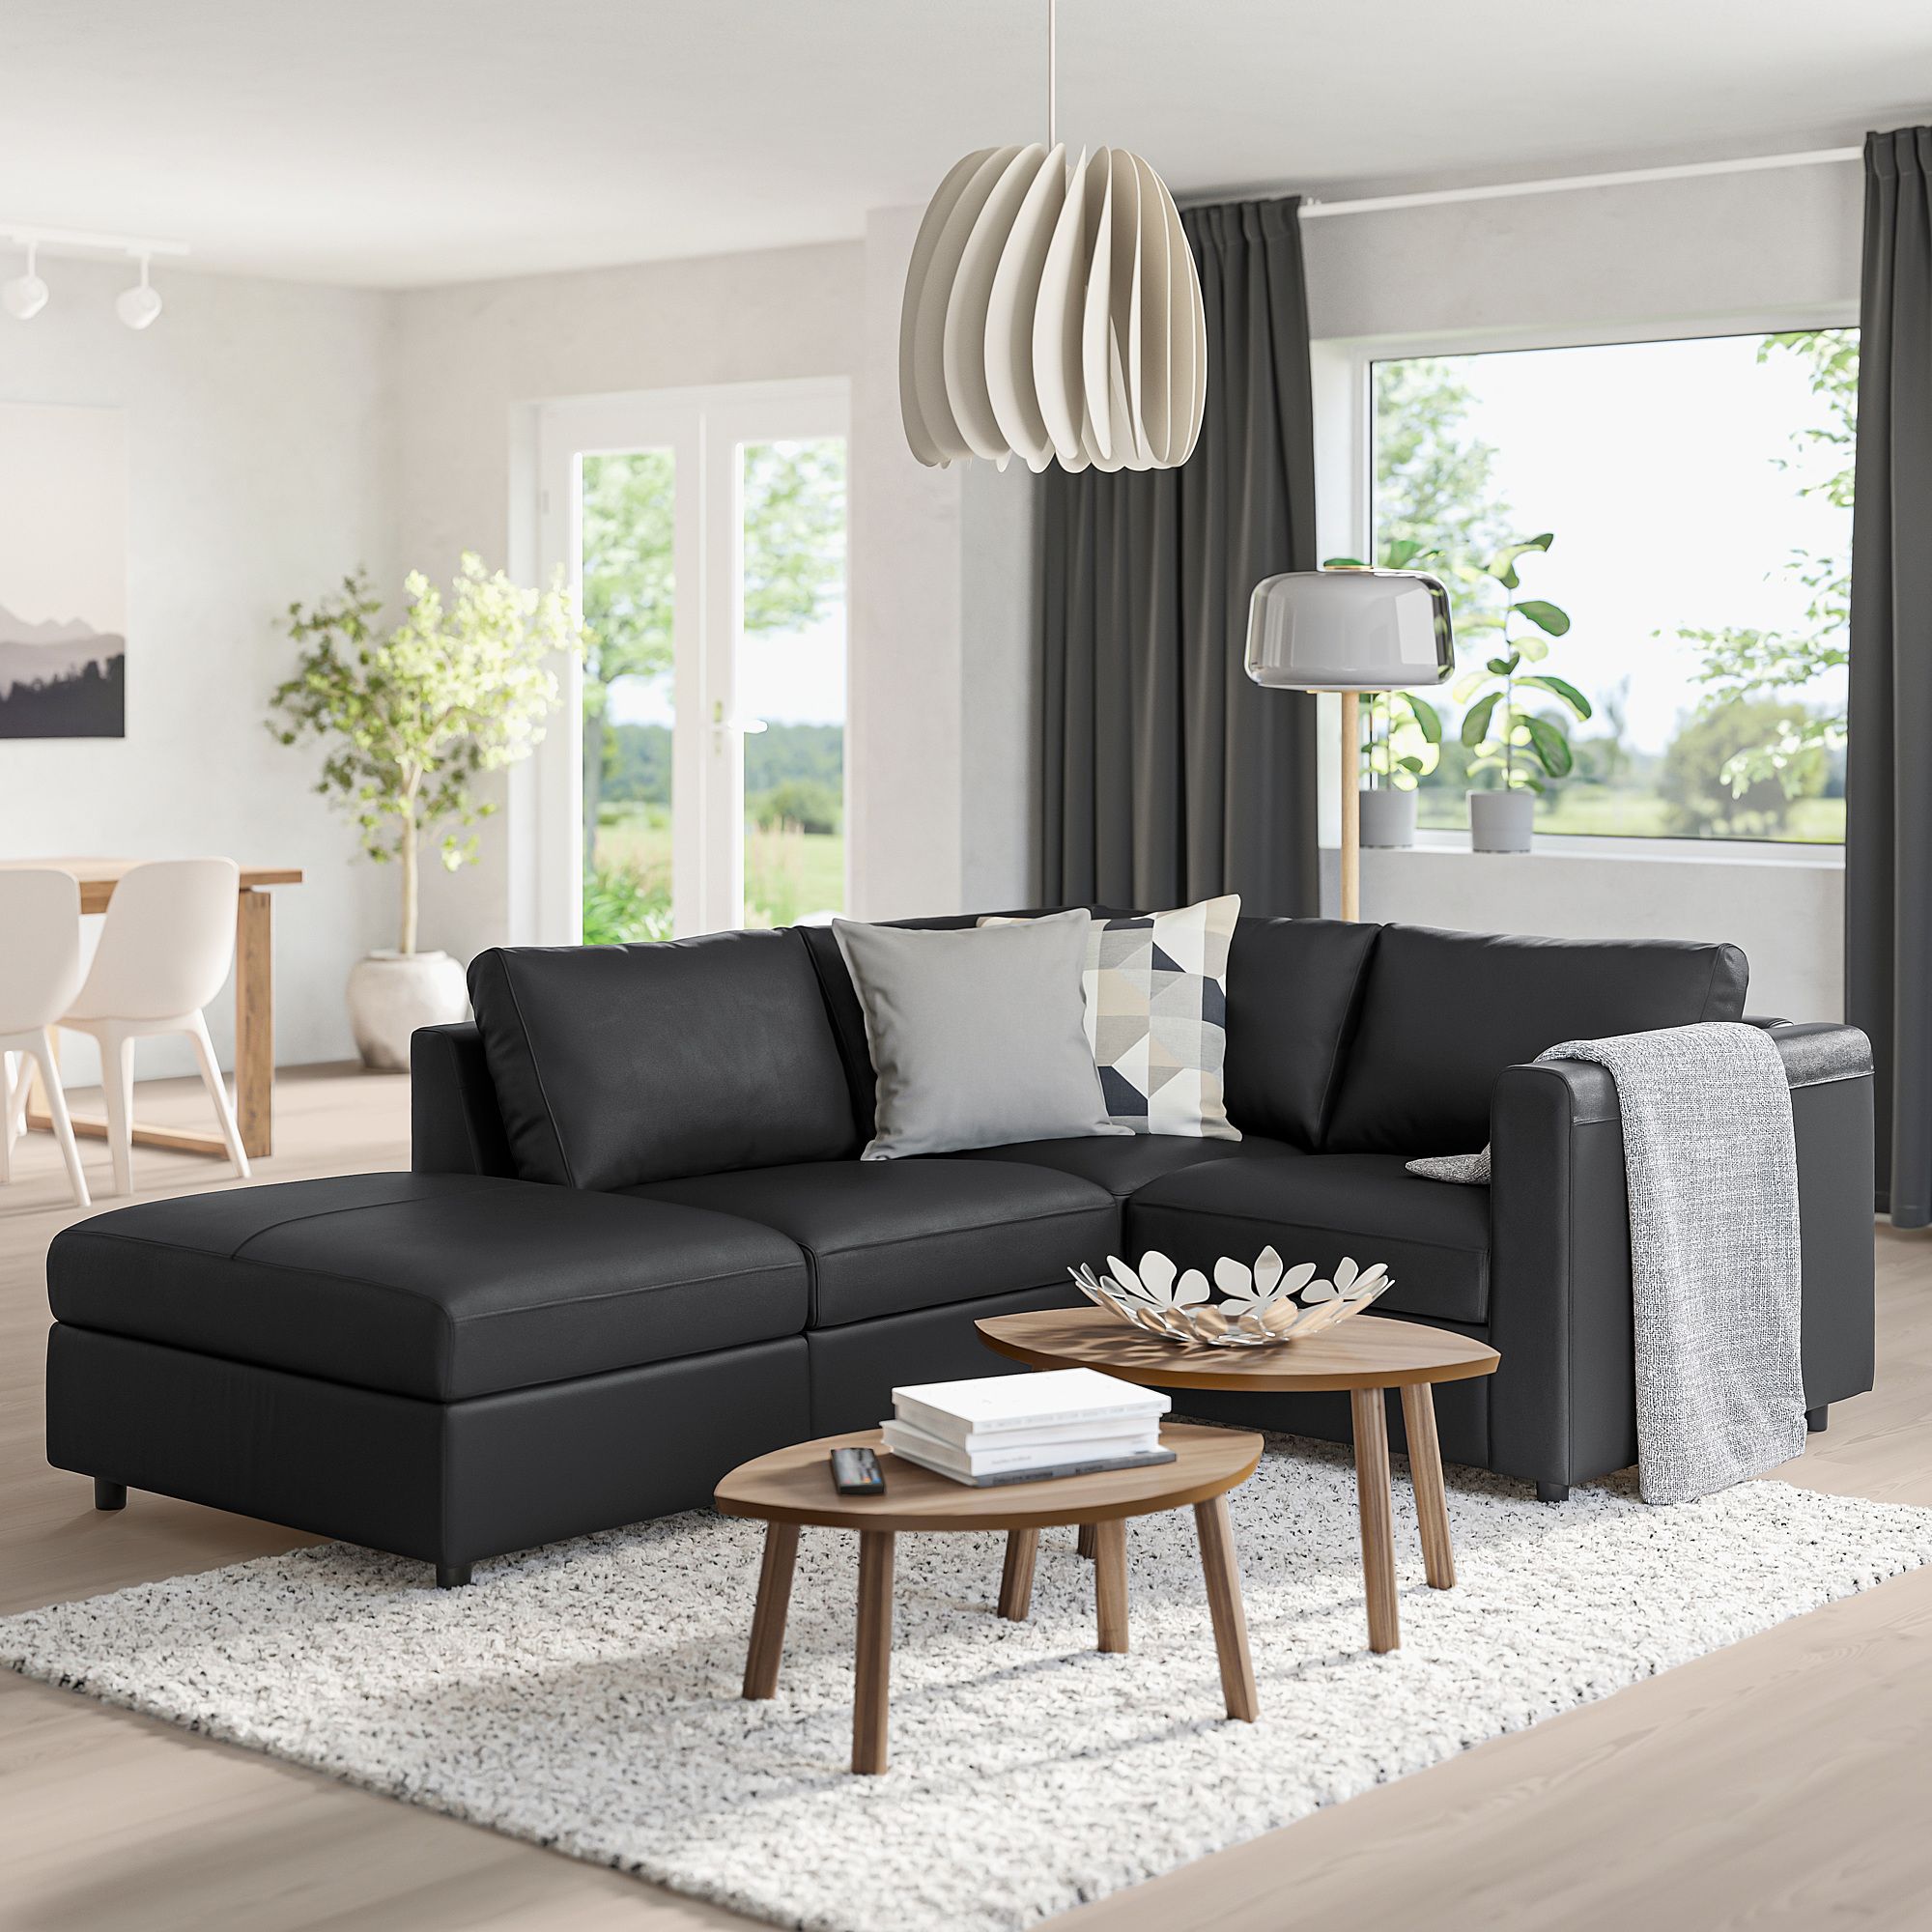 Vimle Corner Sofa, 3 Seat With Open End/Grann/Bomstad Black | Ikea Lietuva Intended For Microfiber Sectional Corner Sofas (View 2 of 15)